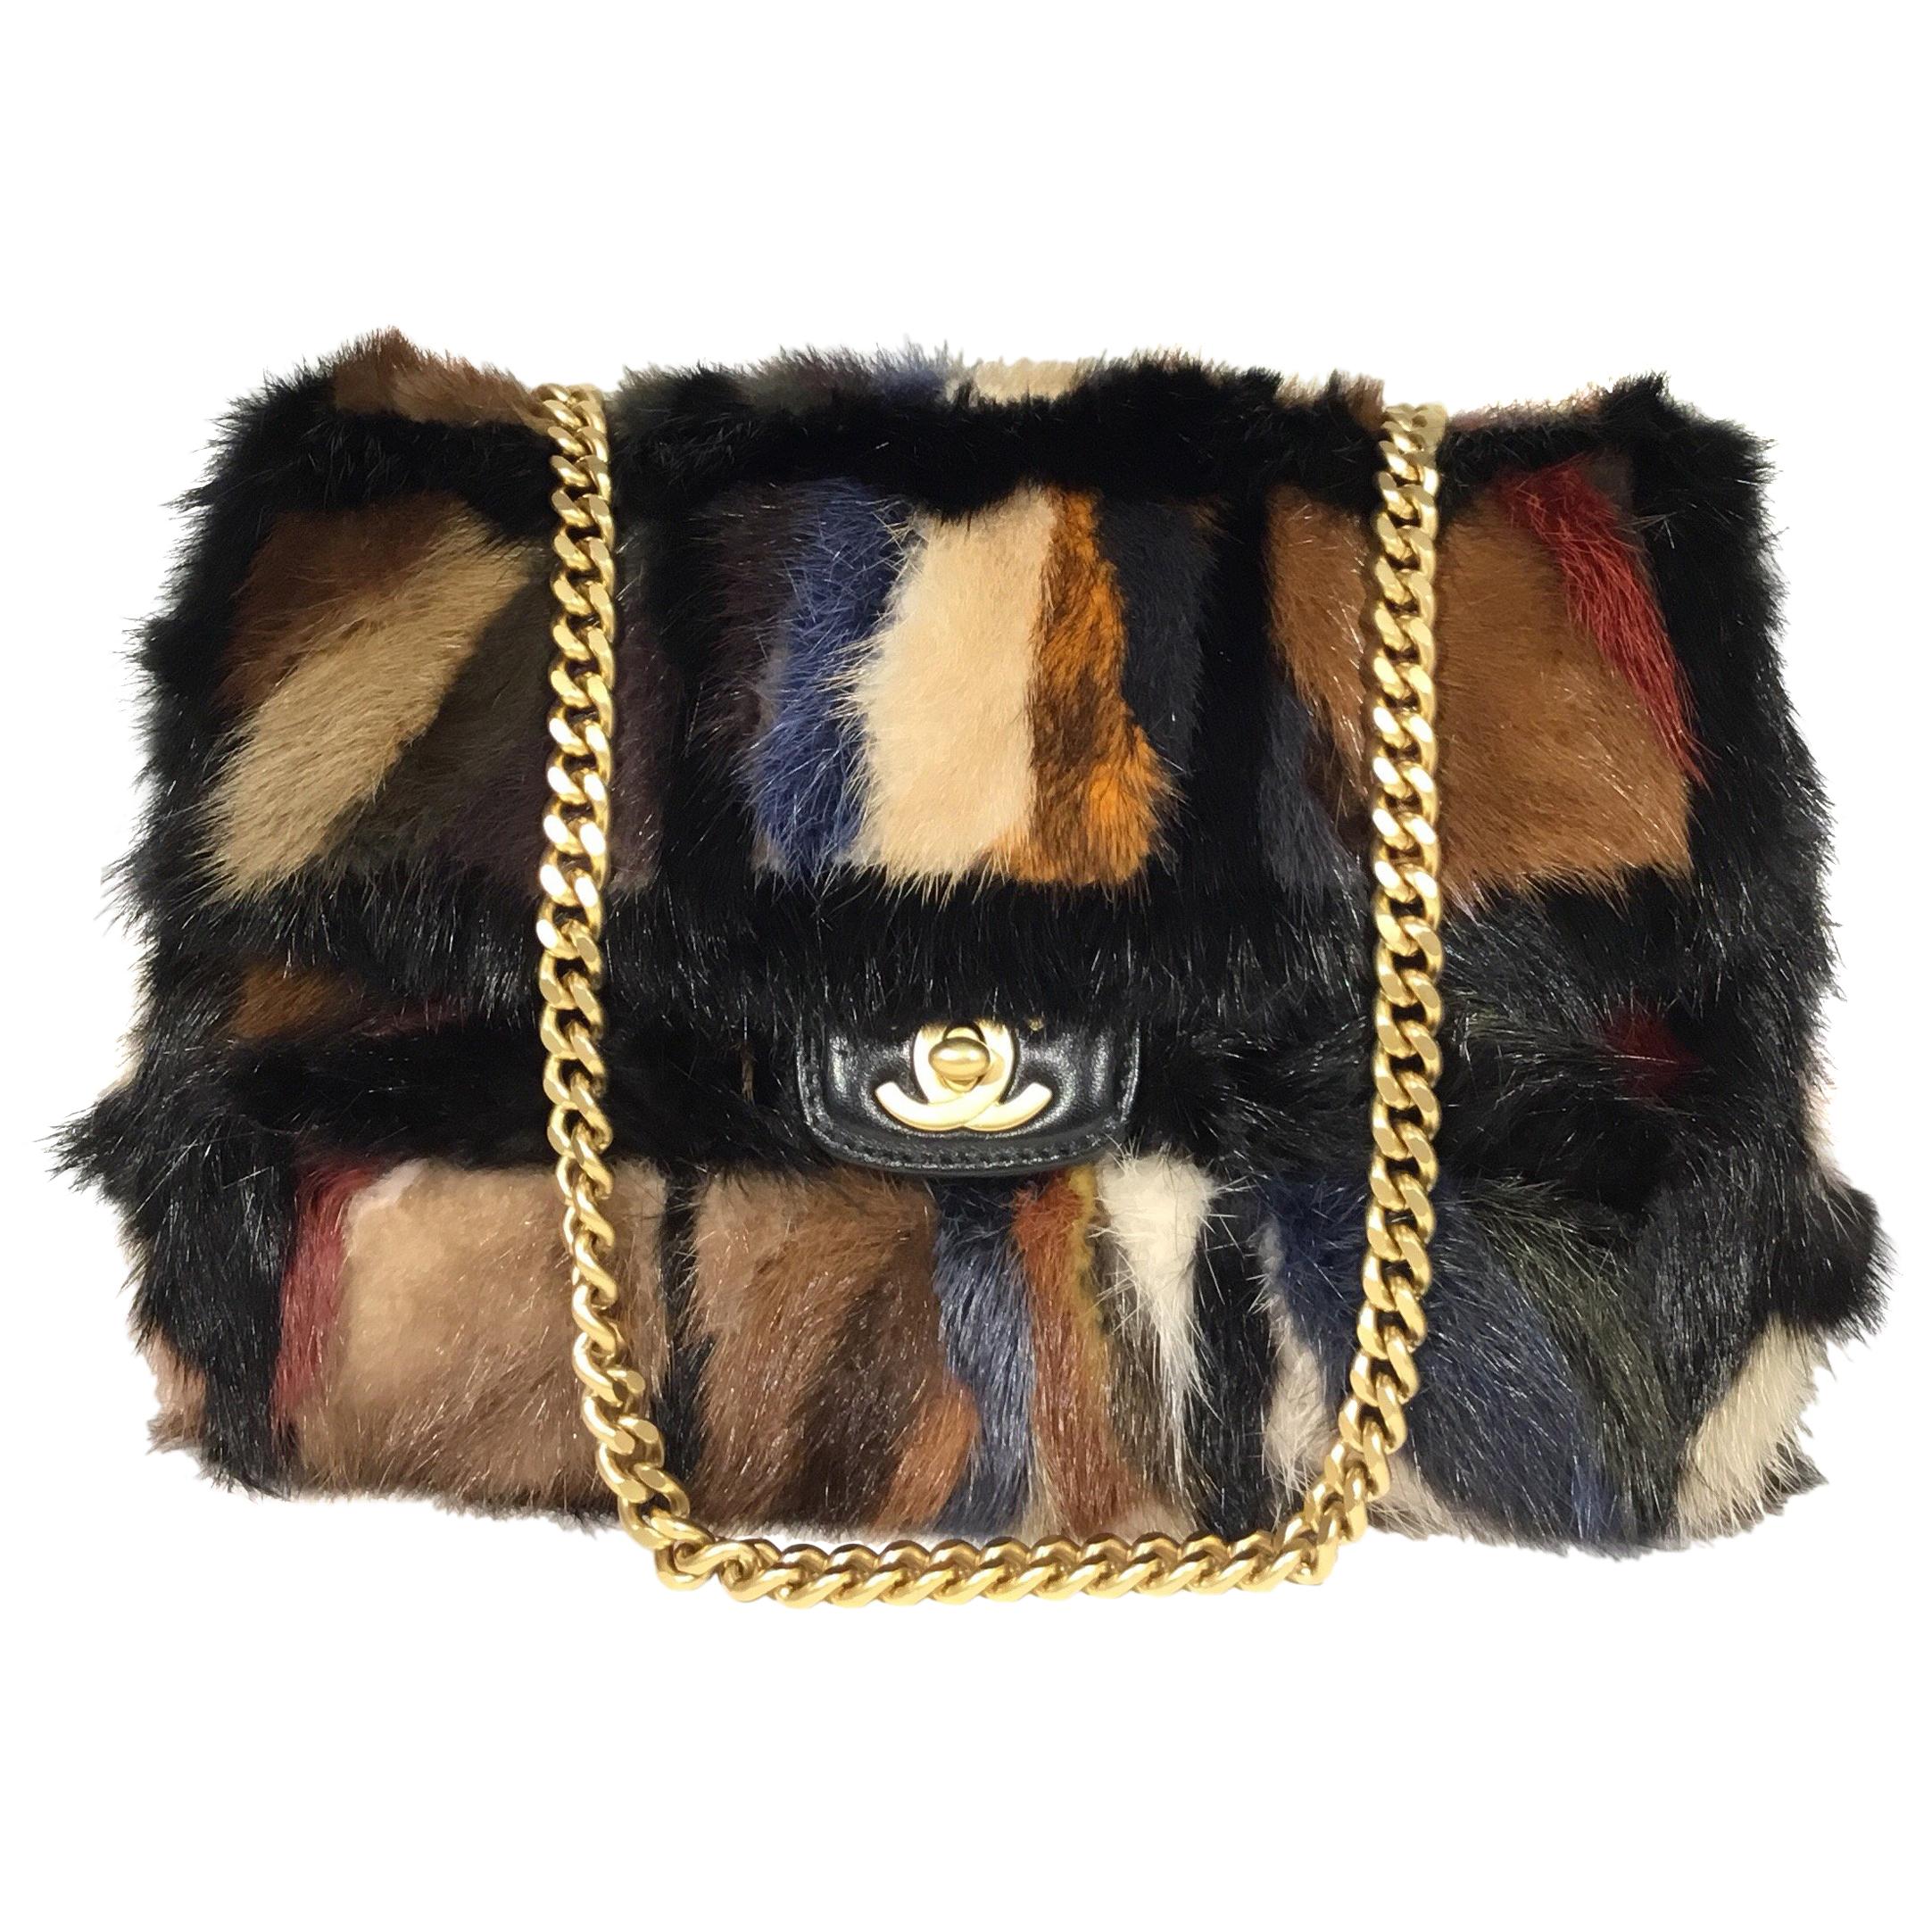 Chanel Mink Fur Chain Handle Bag 2001 A Collection